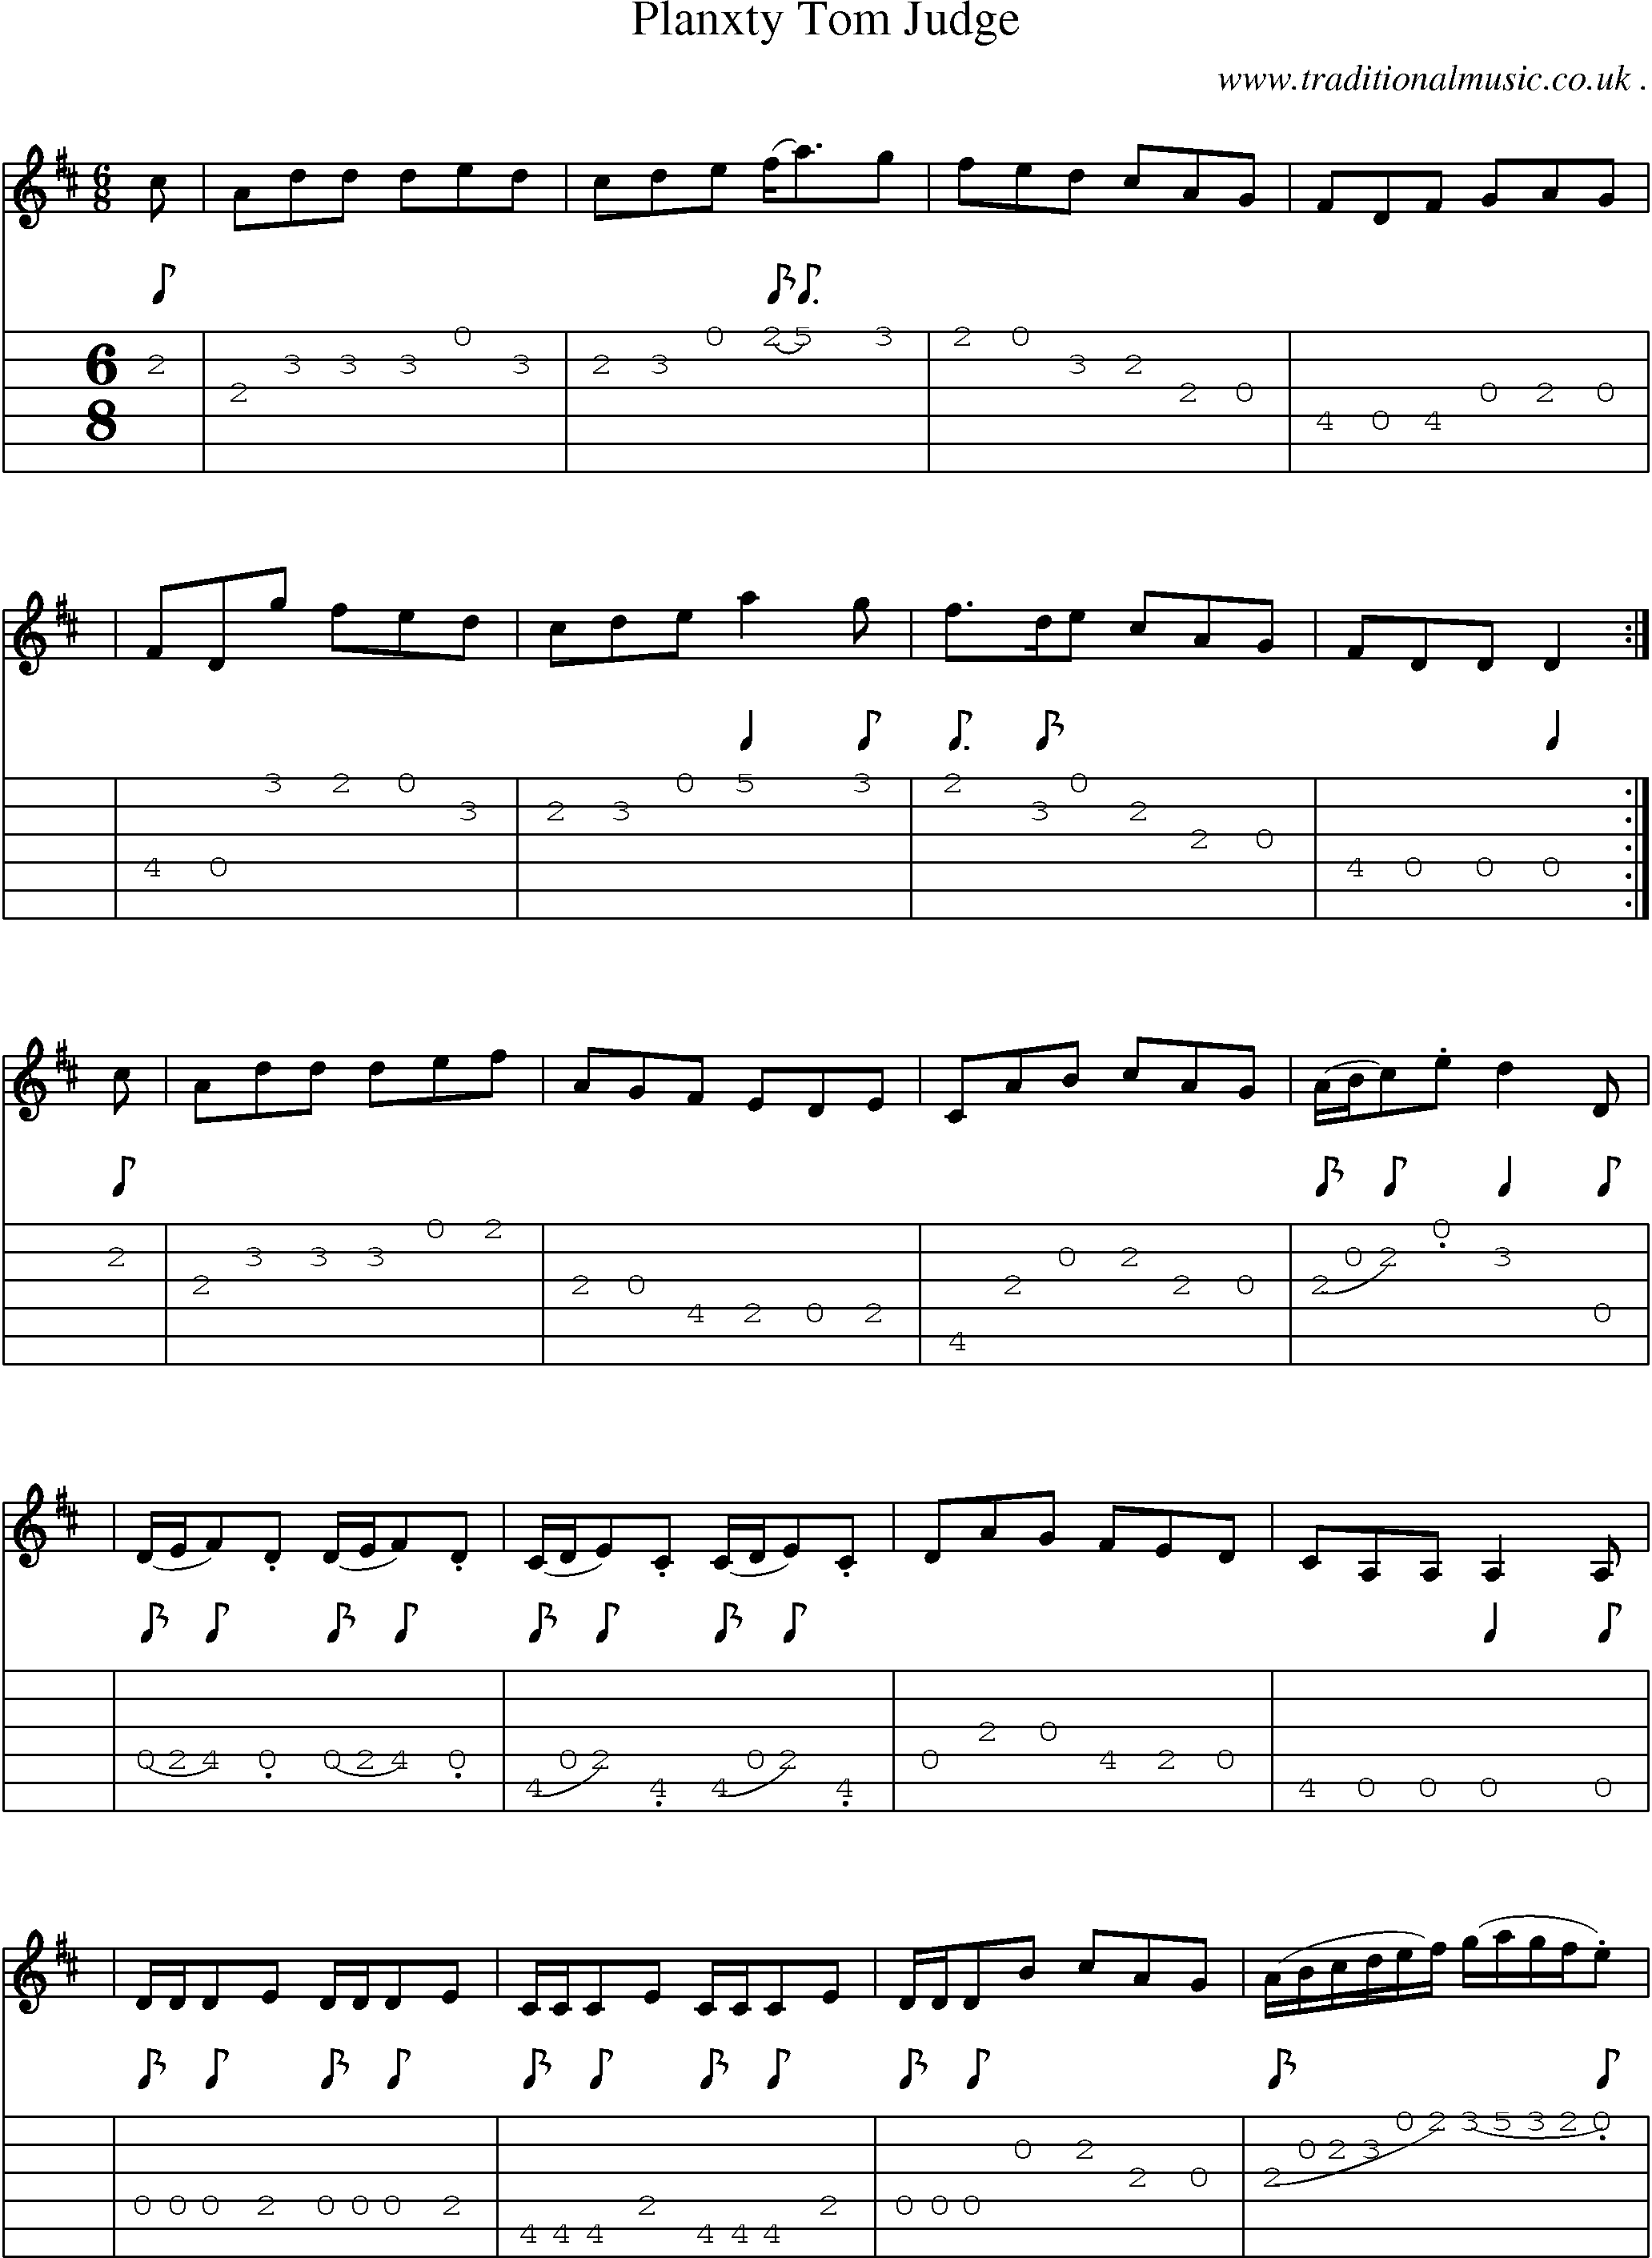 Sheet-music  score, Chords and Guitar Tabs for Planxty Tom Judge